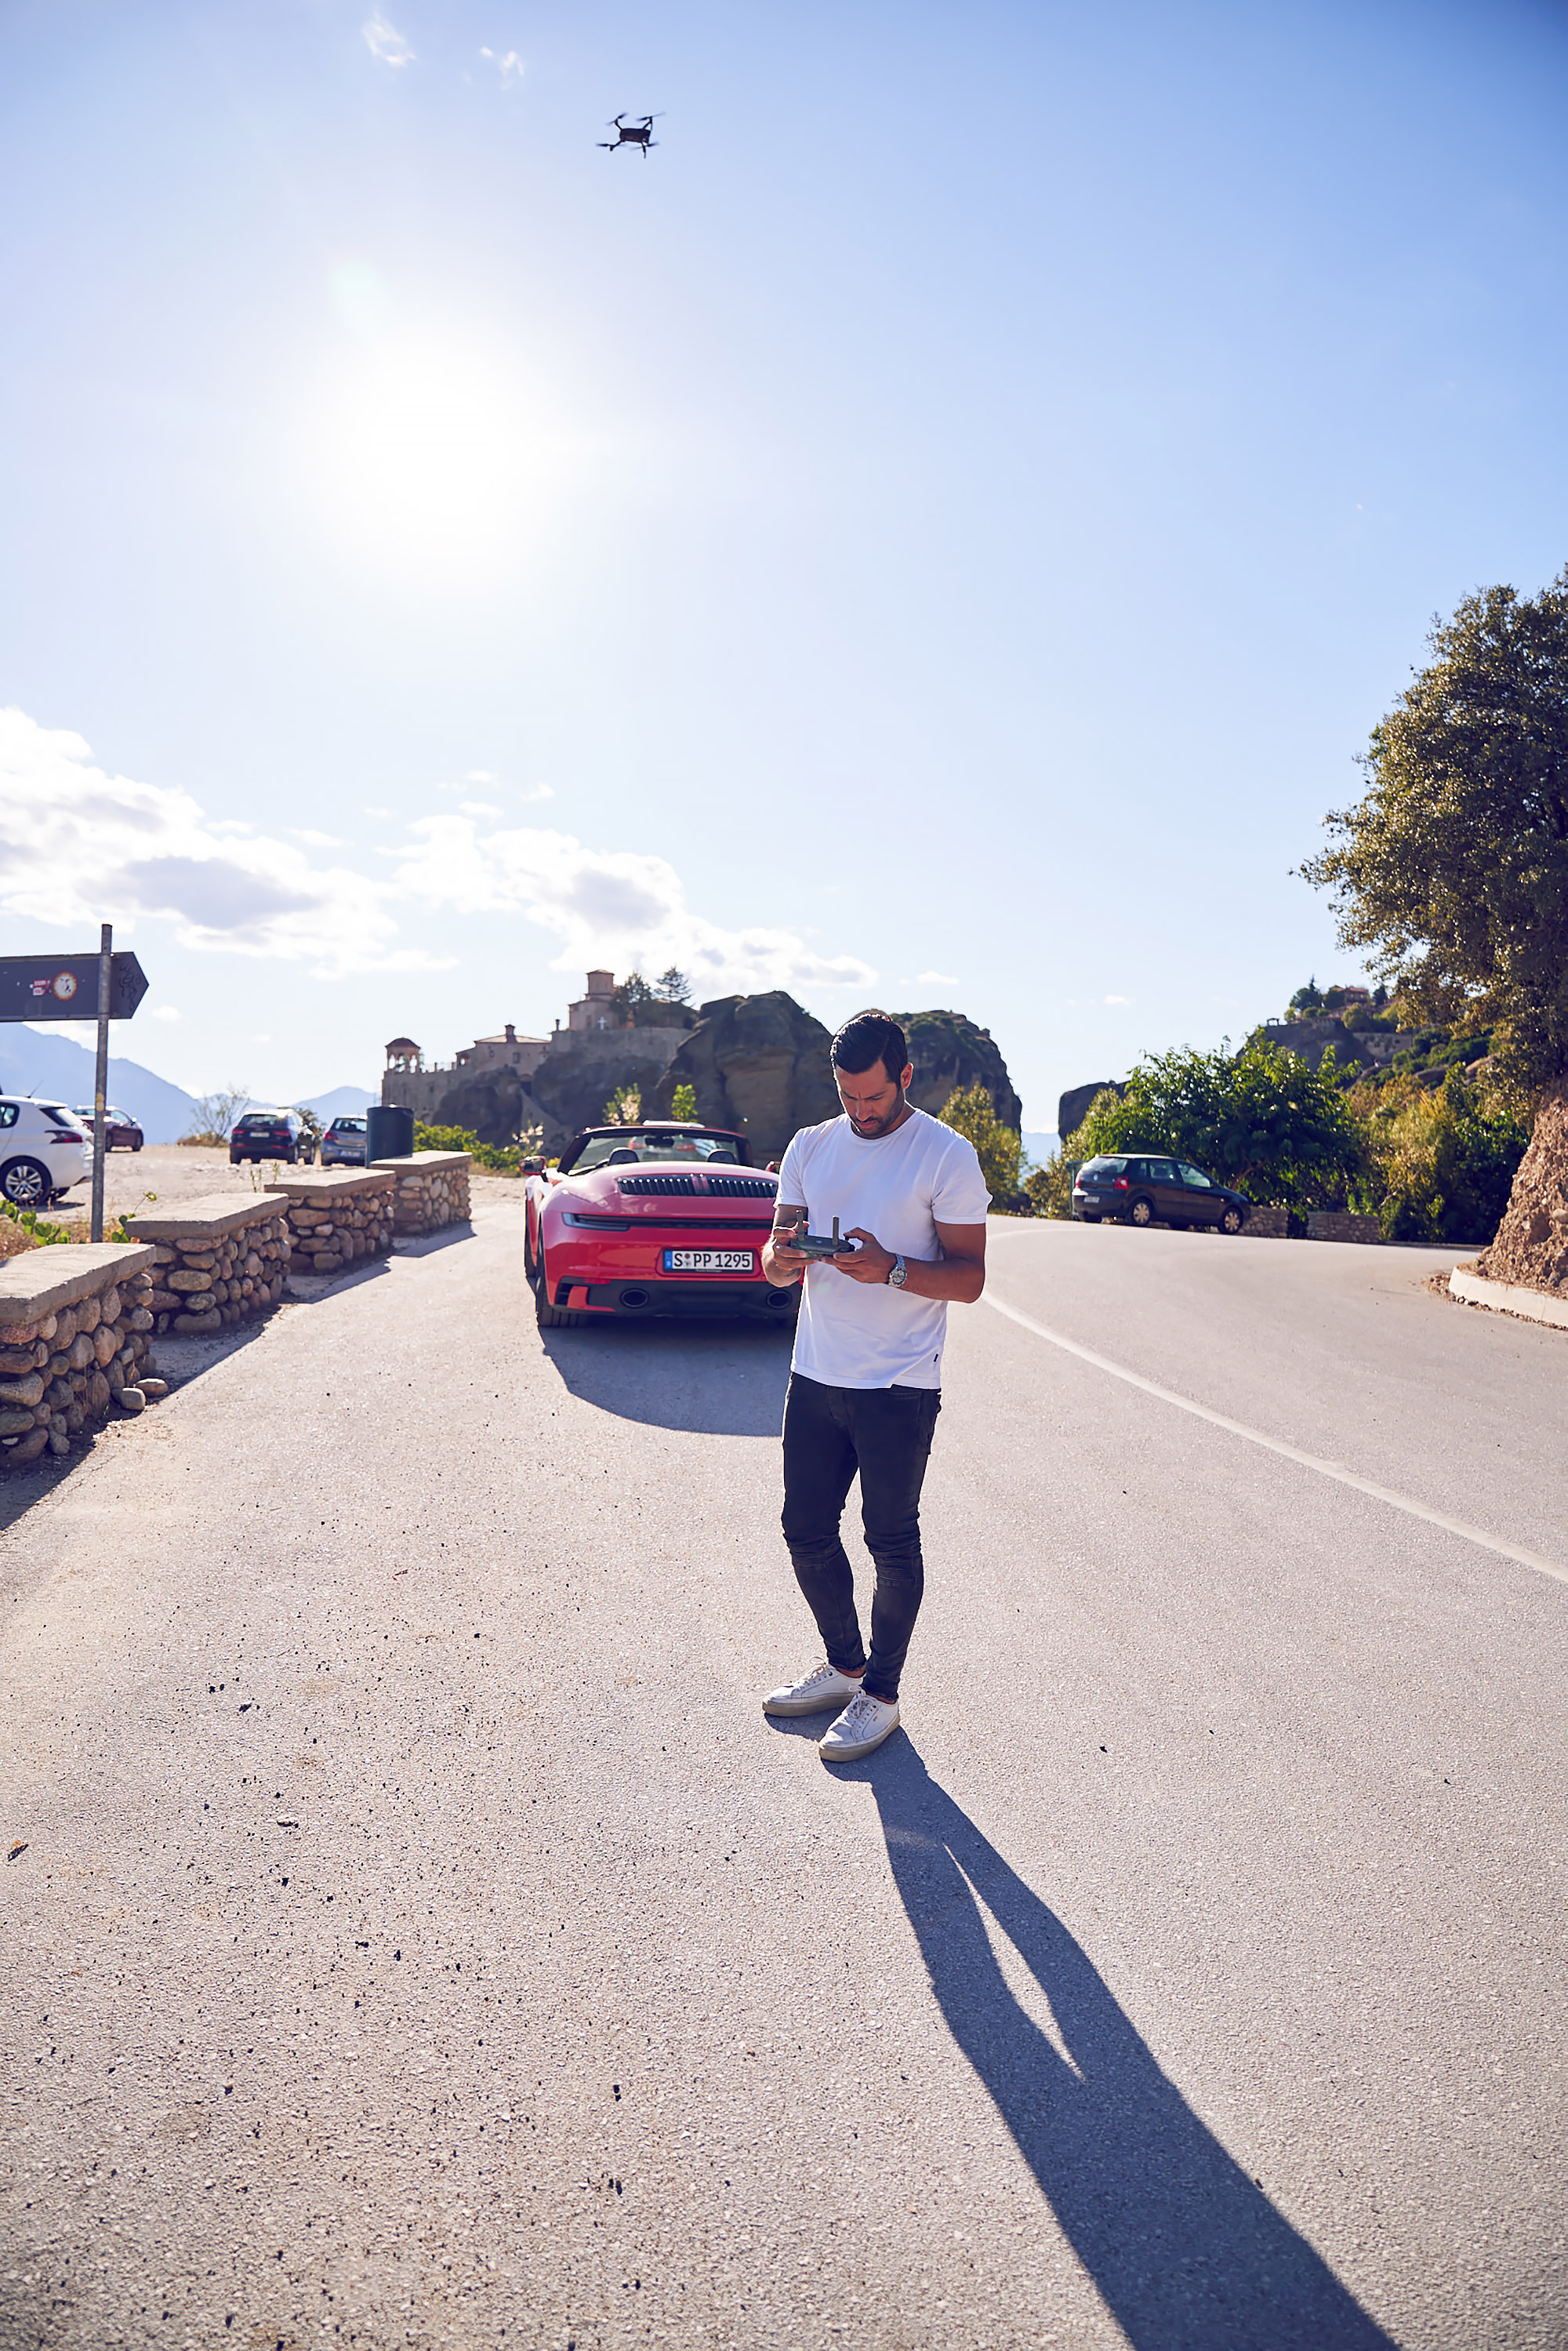 Costas Spathis with his drone and the Porsche 911 Cabriolet